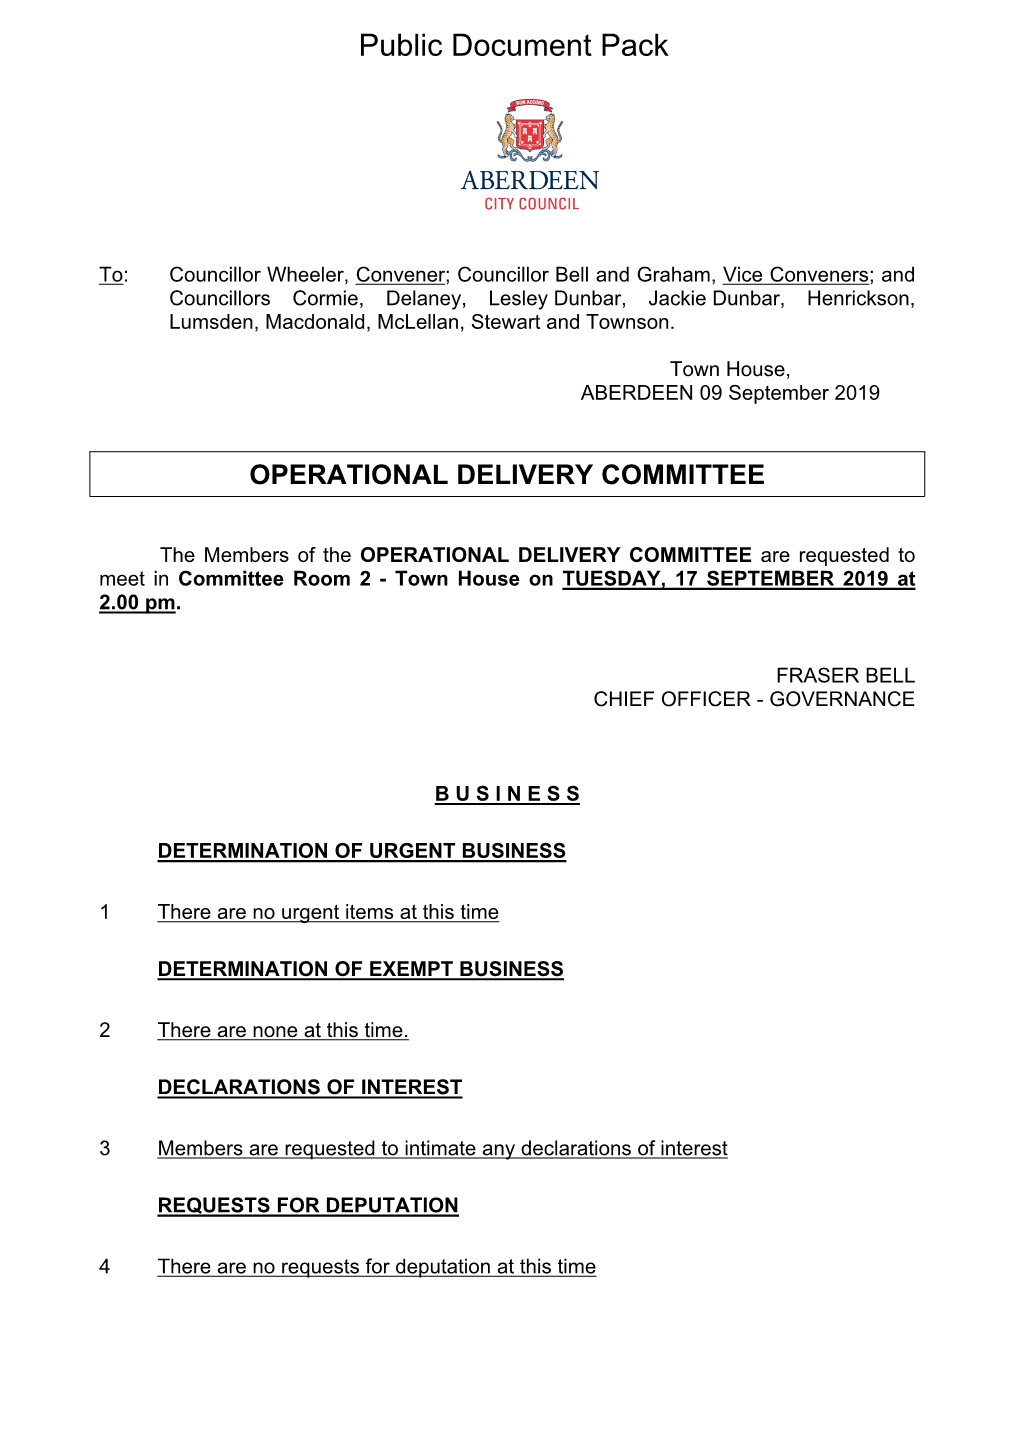 (Public Pack)Agenda Document for Operational Delivery Committee, 17